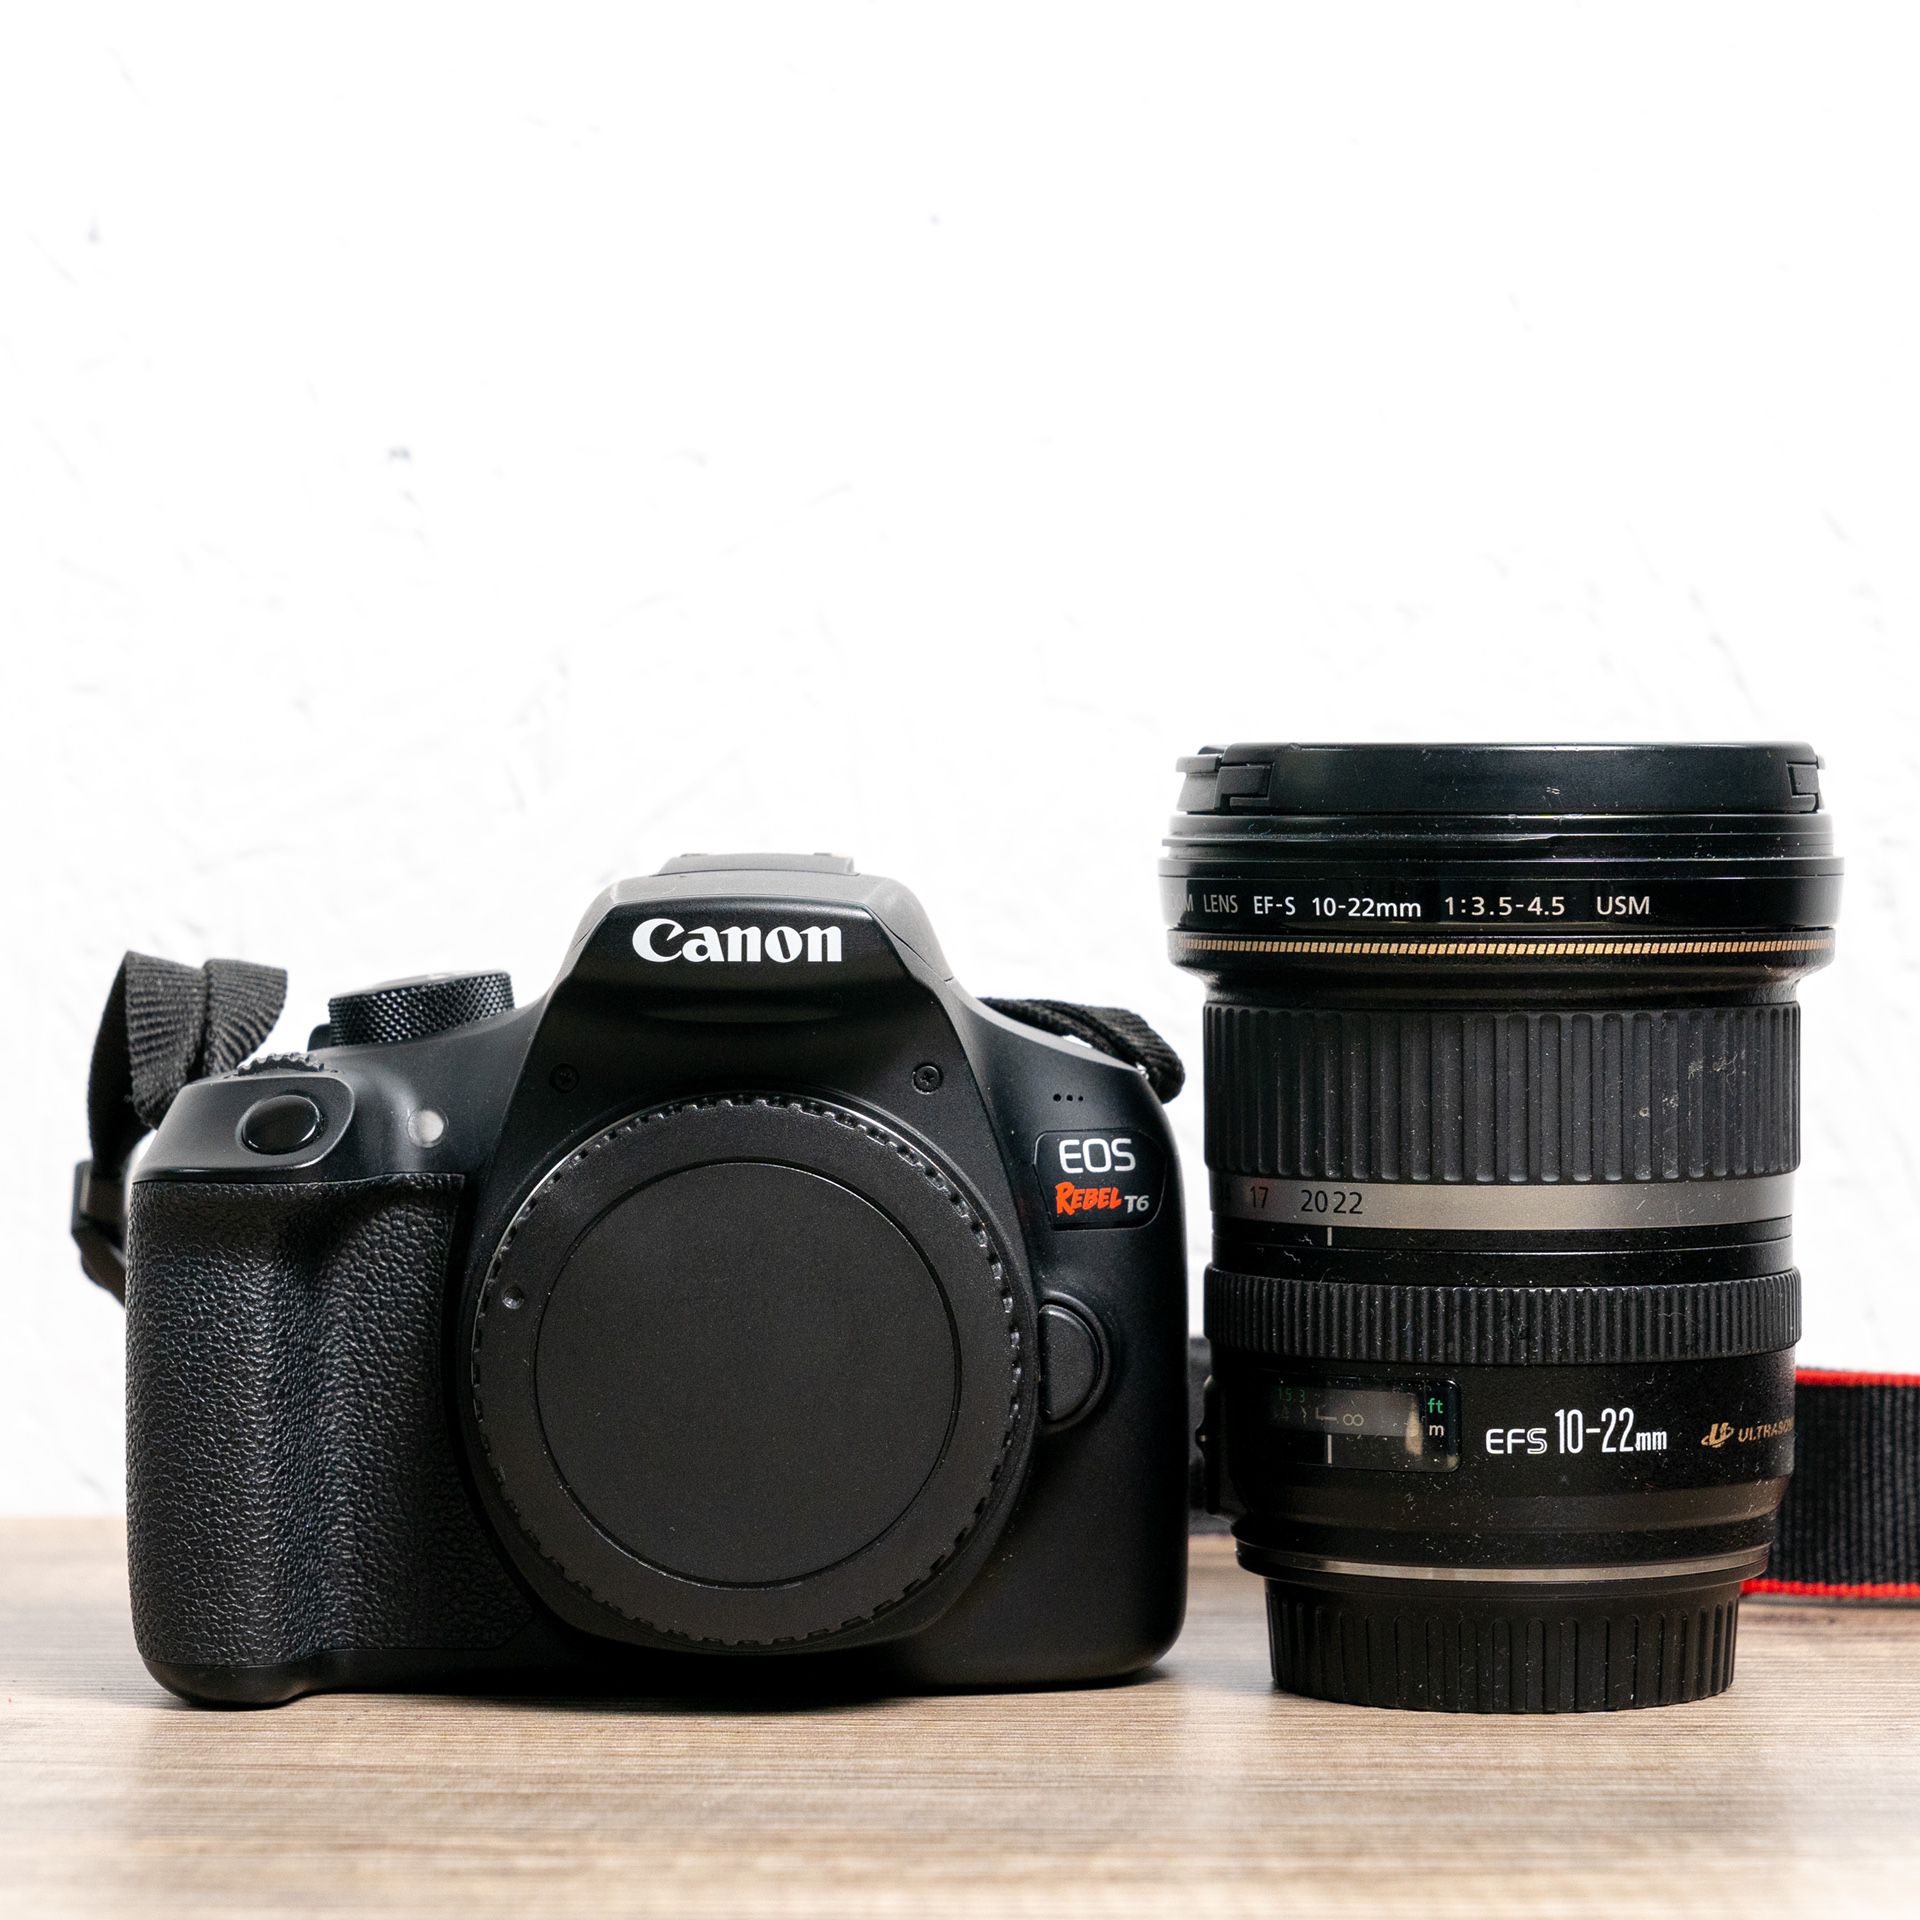 Canon Rebel T6 DSLR and 10-22 mm wide angle lens